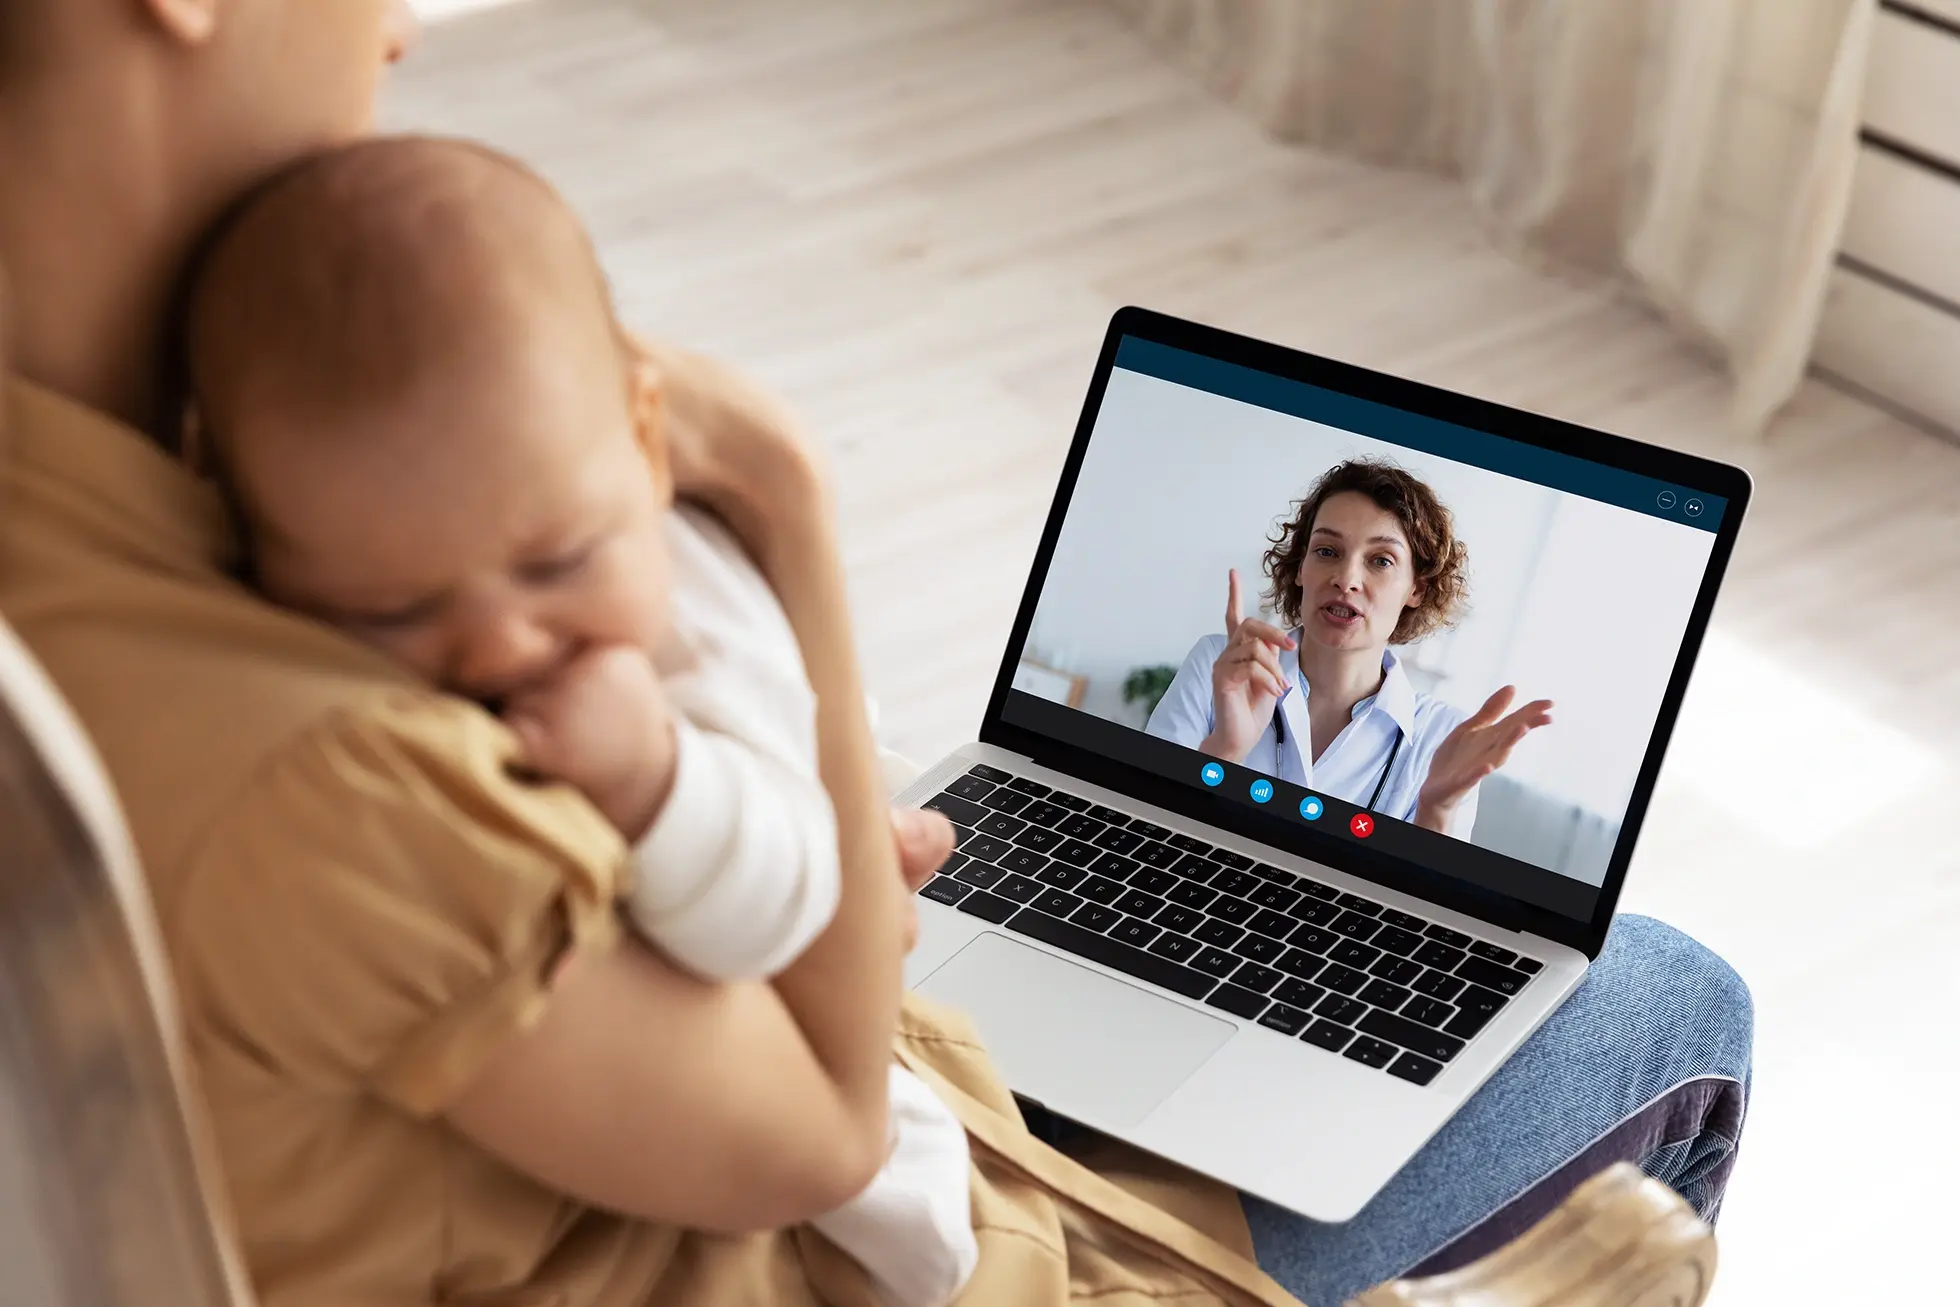 A woman is holding a baby while on a video call with a doctor.